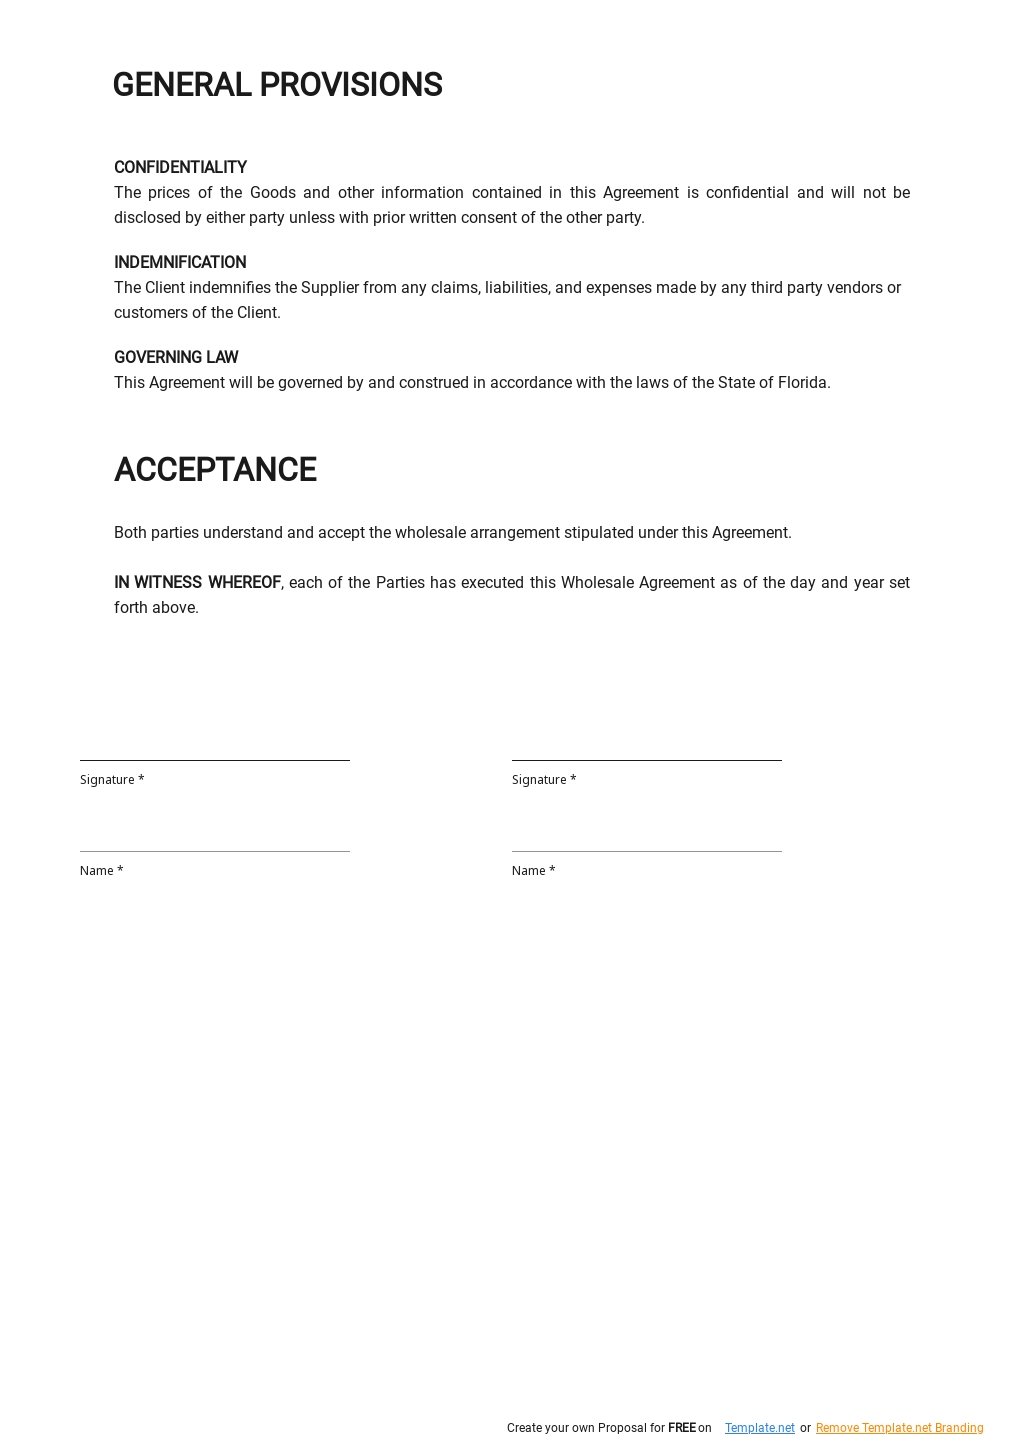 FREE Simple Wholesale Agreement Template in Google Docs, Word